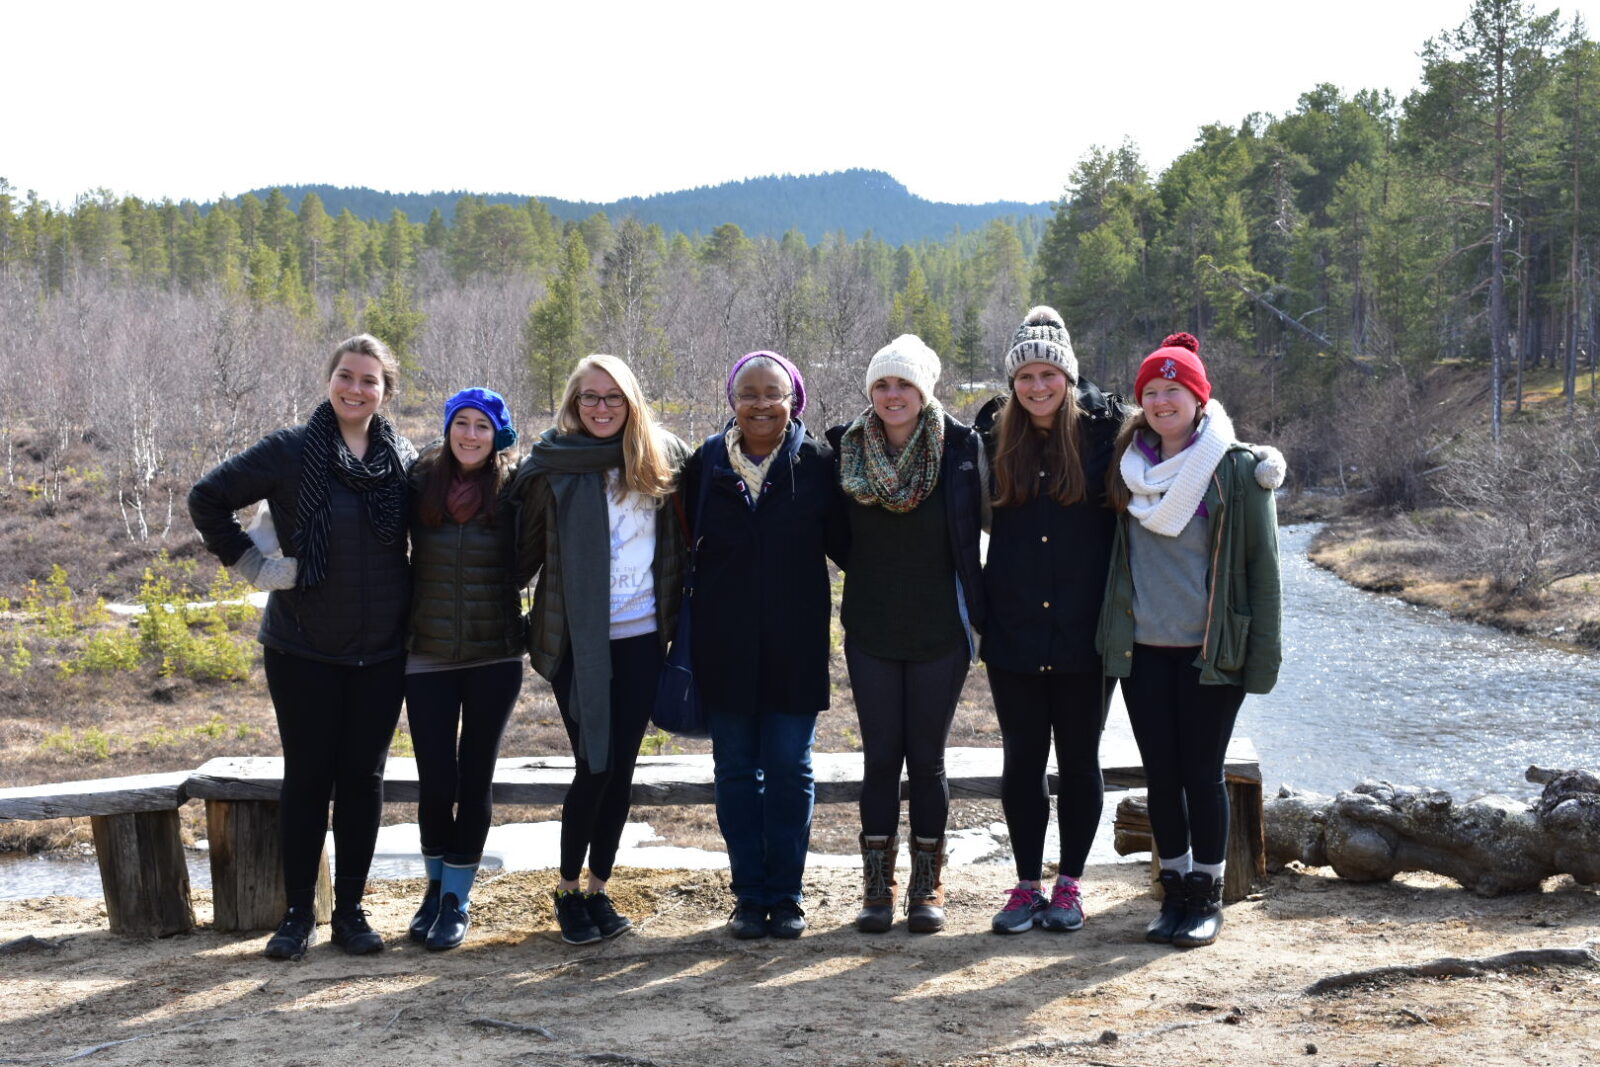 Associate Dean of Academic Affairs Jerri Bourjolly along with students who traveled to Finland